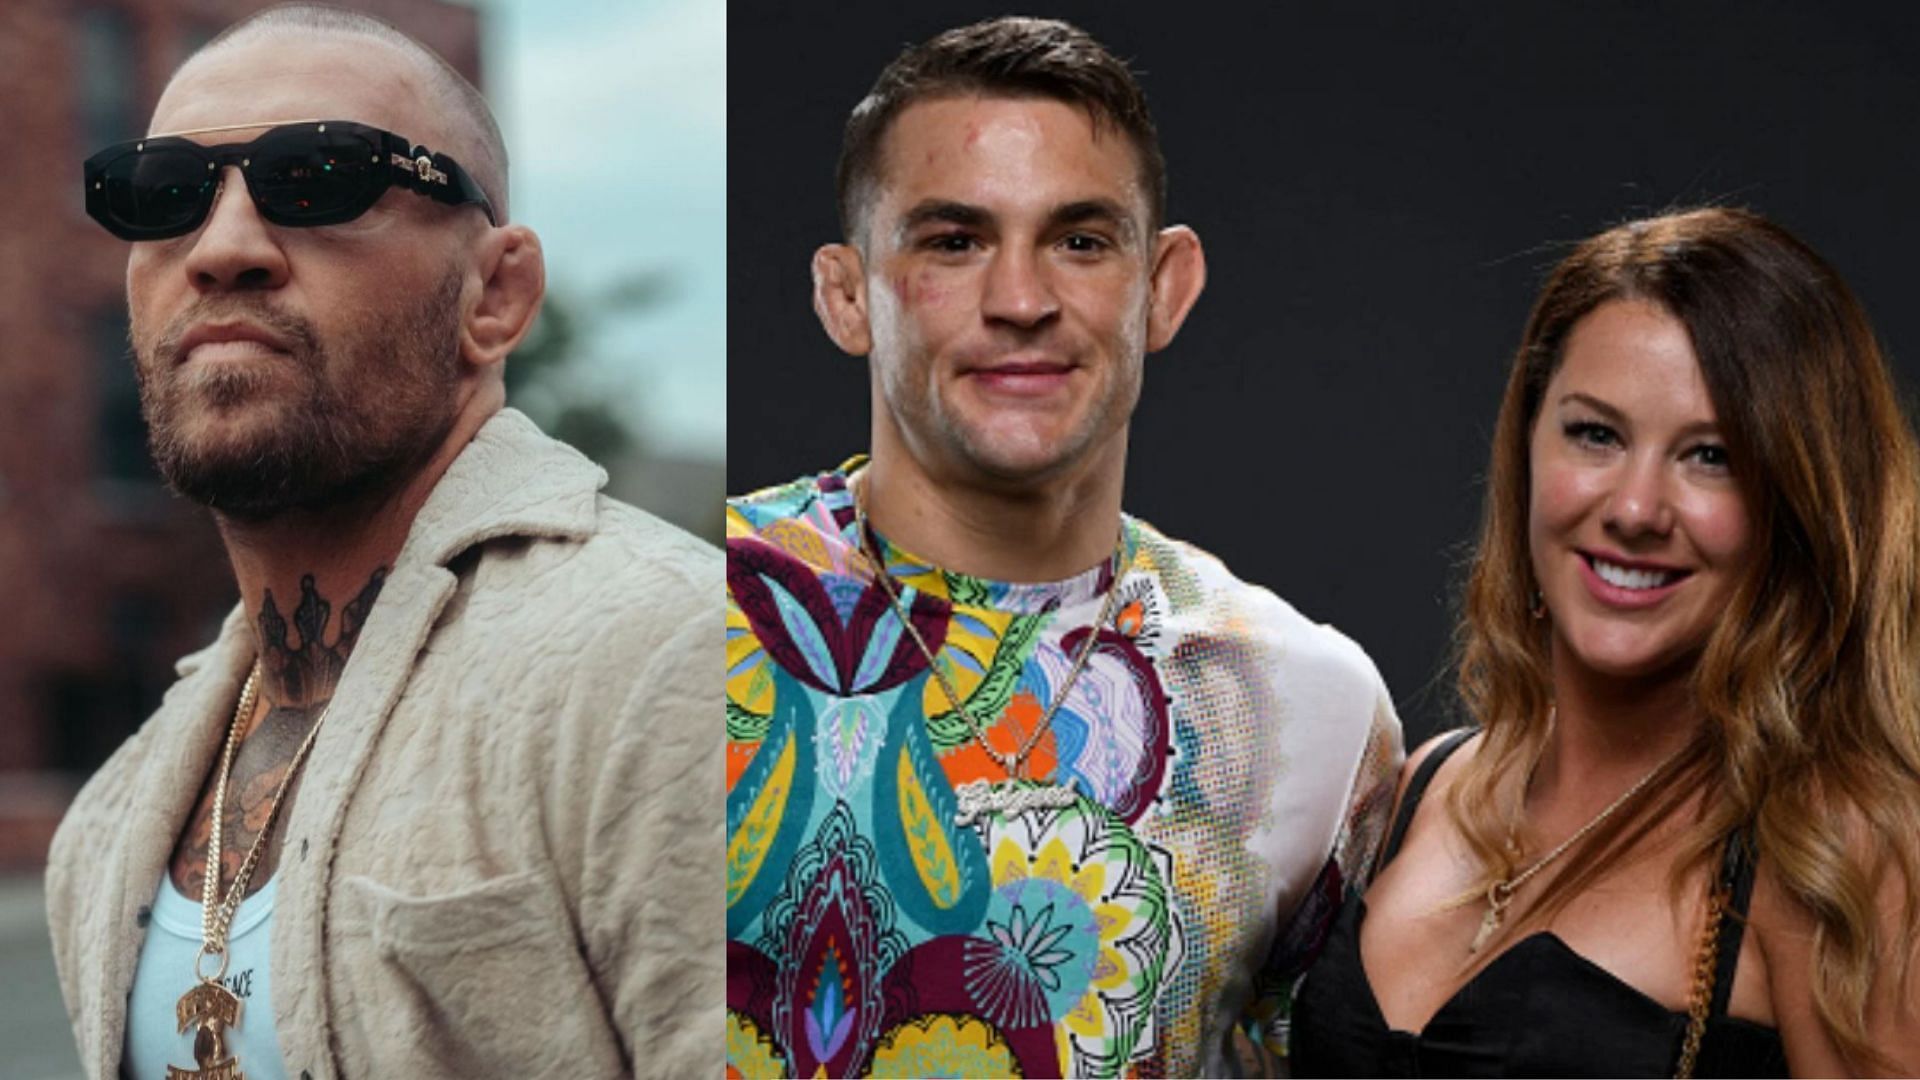 Conor McGregor makes controversial remark regarding Dustin Poirier and his wife Jolie [Images courtesy of @thenotoriousmma &amp; @dustinpoirier on Instagram]